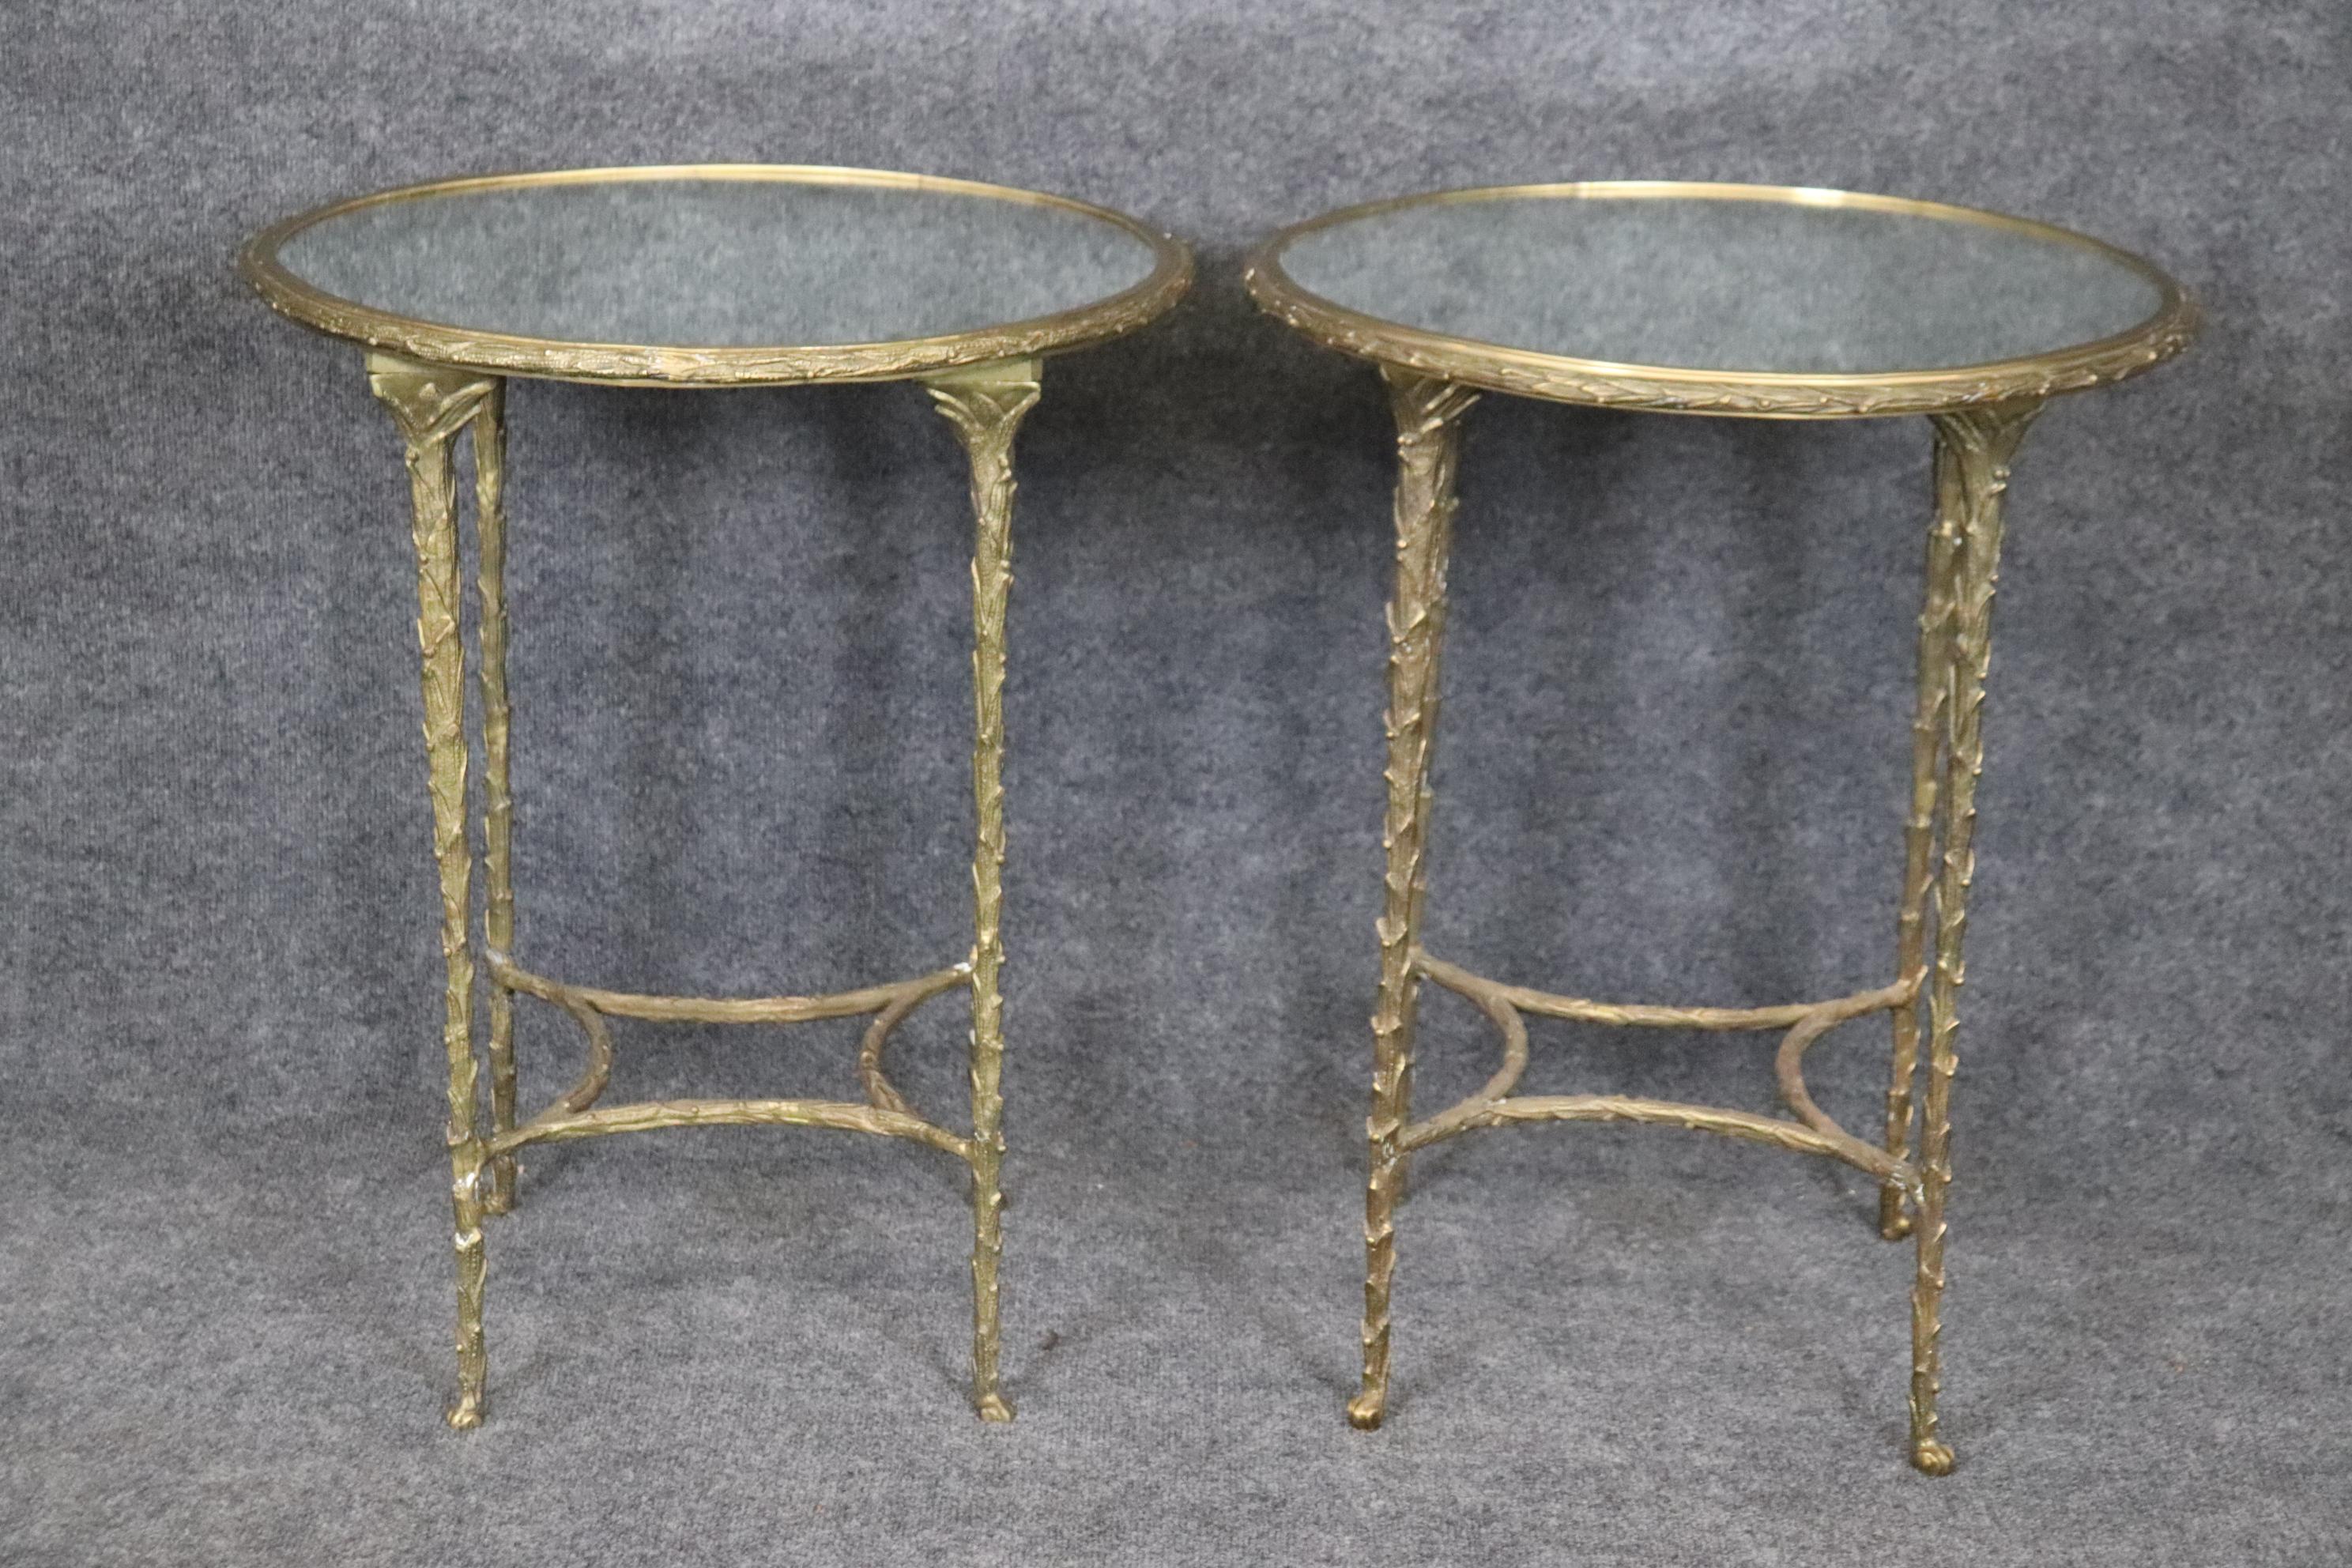 Dimensions- H: 25 3/4in W: 21in D: 21in

This pair of Mid Century faux bois mirrored top end tables, attributed to Maison Bagues, is made of the highest quality brass! The brass castings were done to look like wood, this gives the end tables a